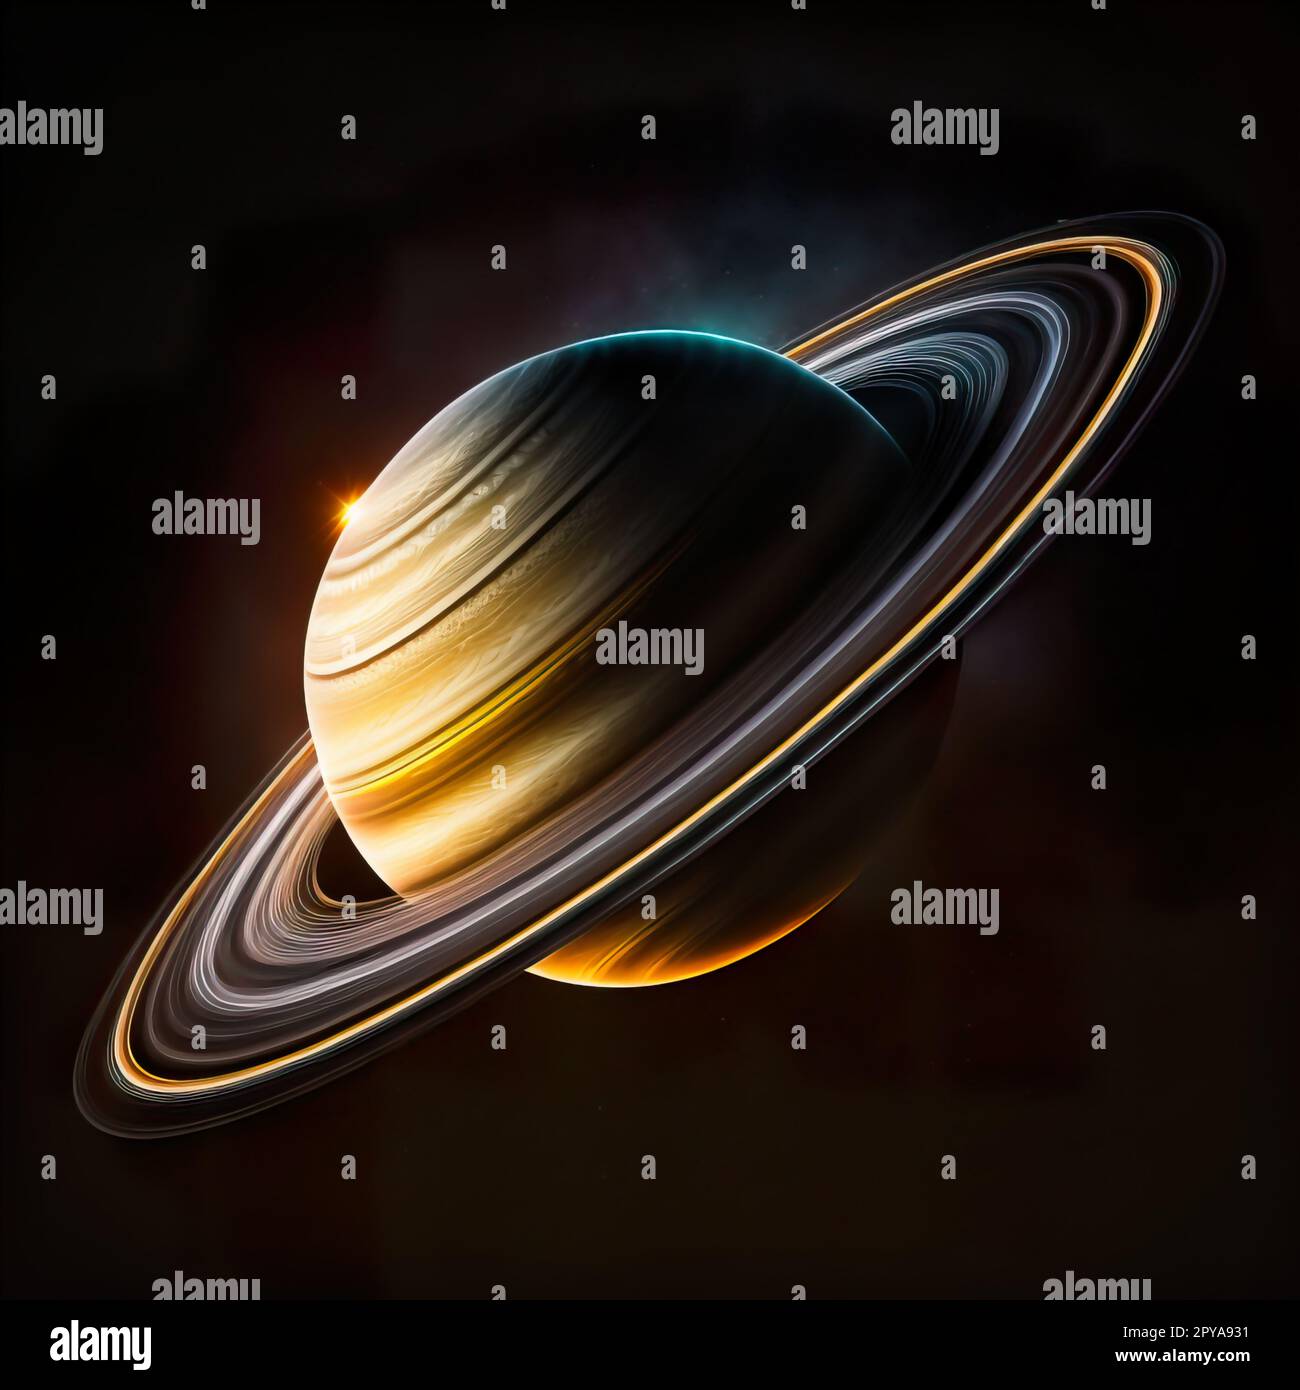 Planet Saturn, on black night. 3D illustration presents planet of the solar system. image elements furnished by NASA. Stock Photo